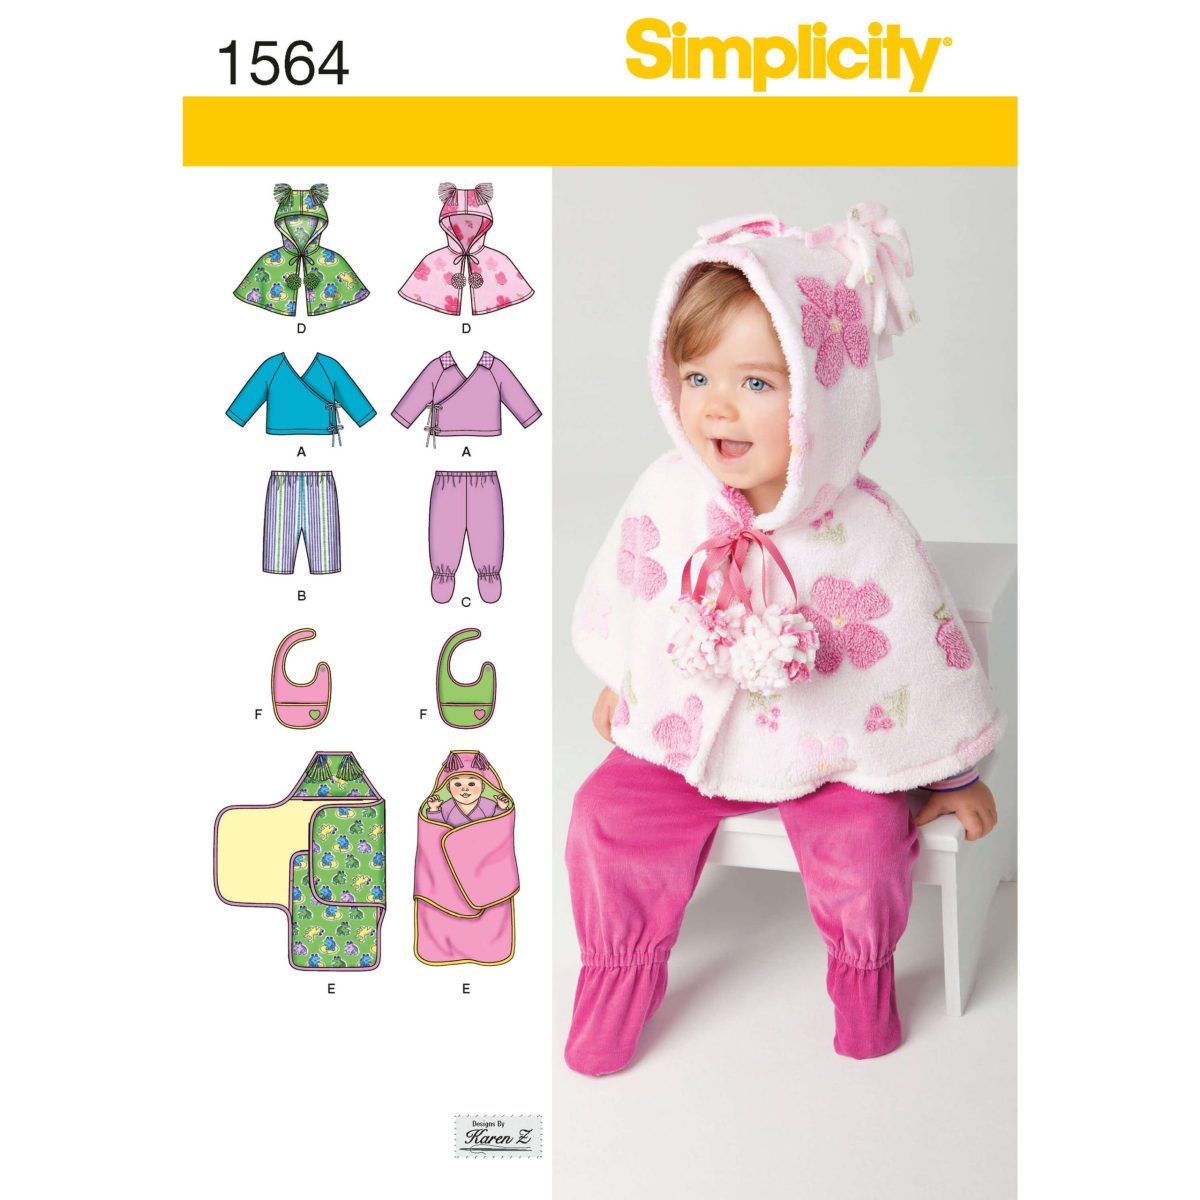 Simplicity Sewing Pattern 1564 Babies' Top, Trousers, Bib, and Blanket Wrap